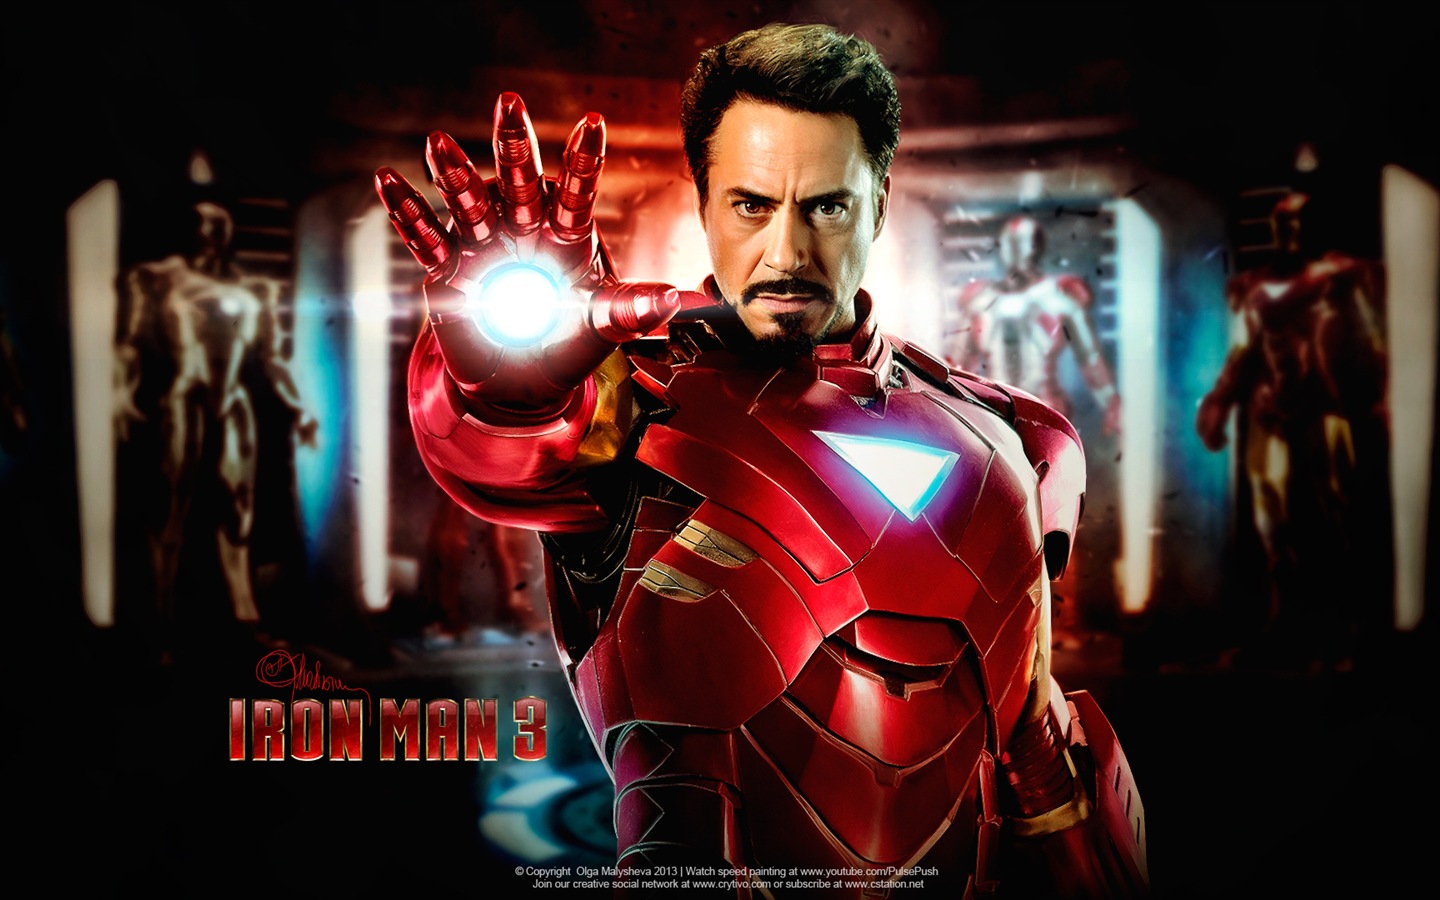 2013 Iron Man 3 newest HD wallpapers #11 - 1440x900